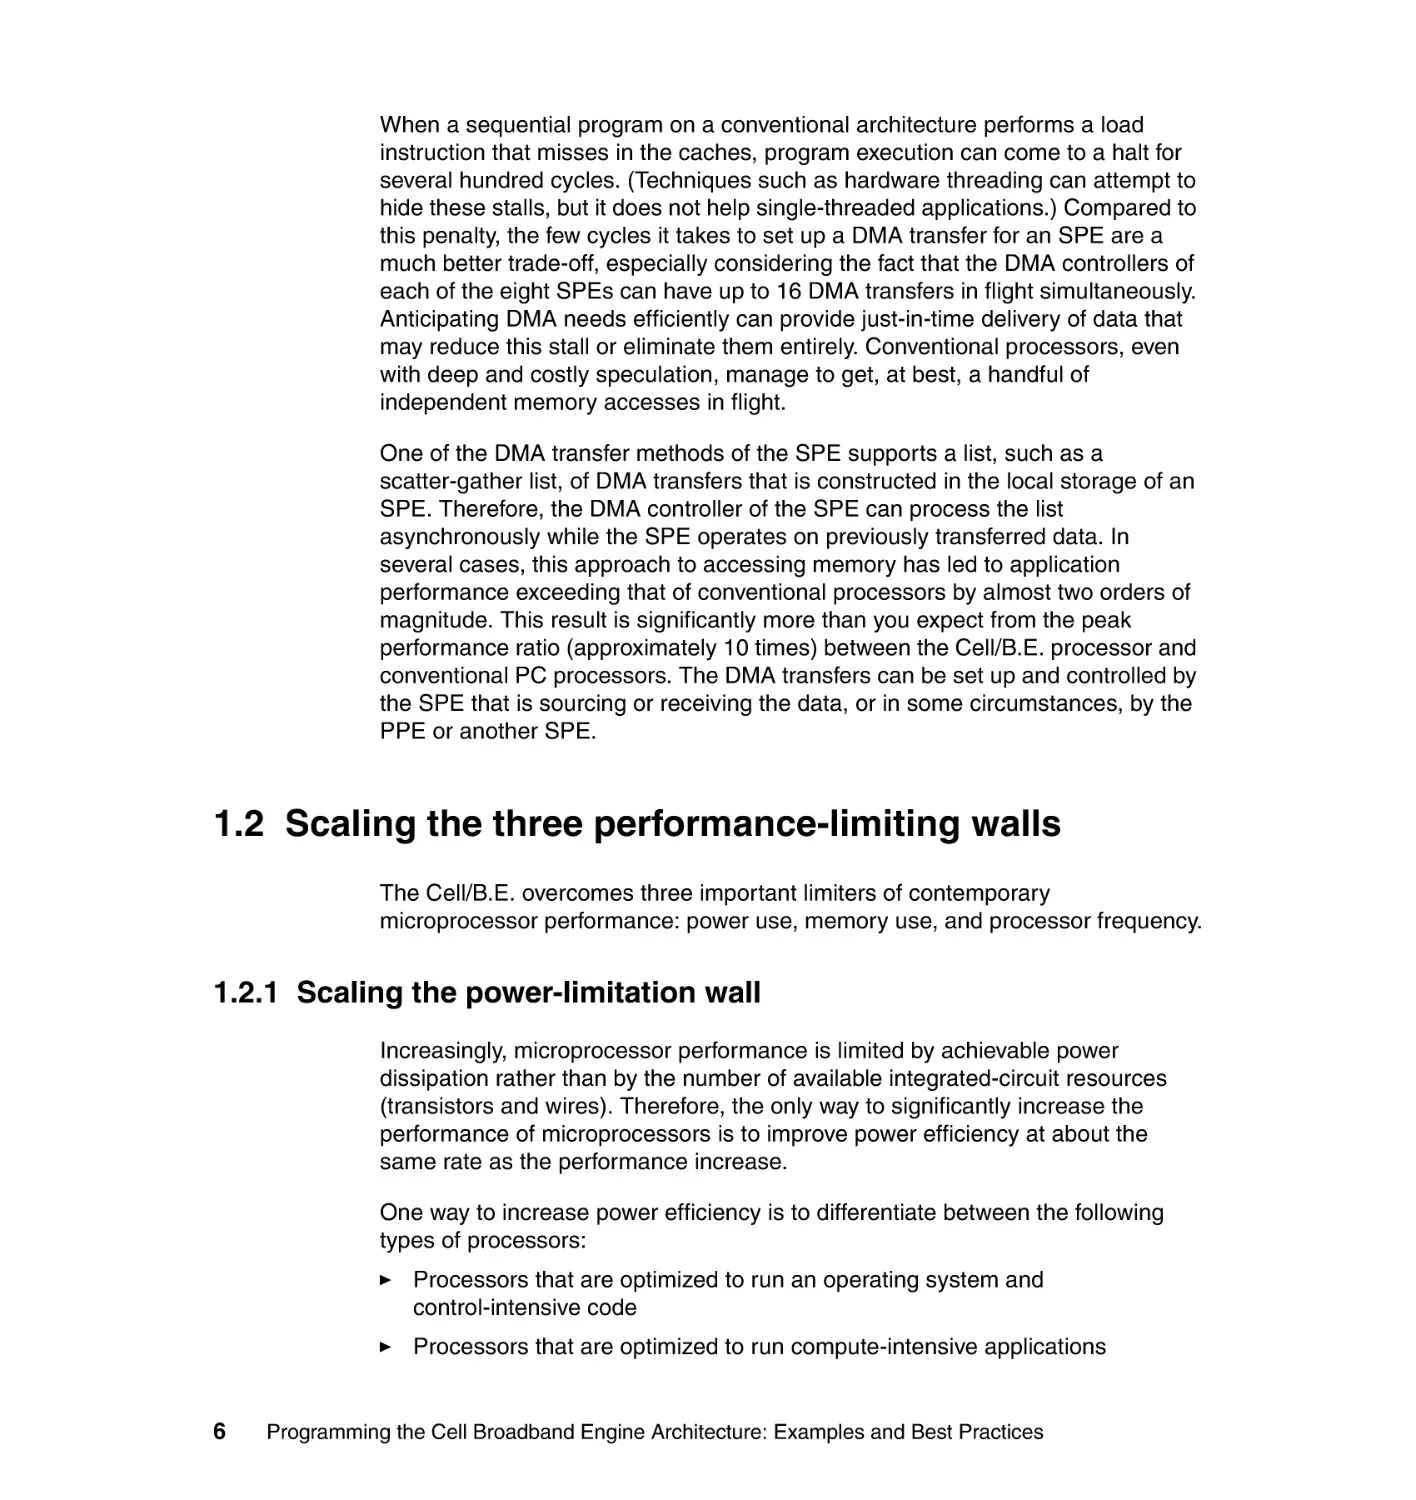 1.2 Scaling the three performance-limiting walls
1.2.1 Scaling the power-limitation wall